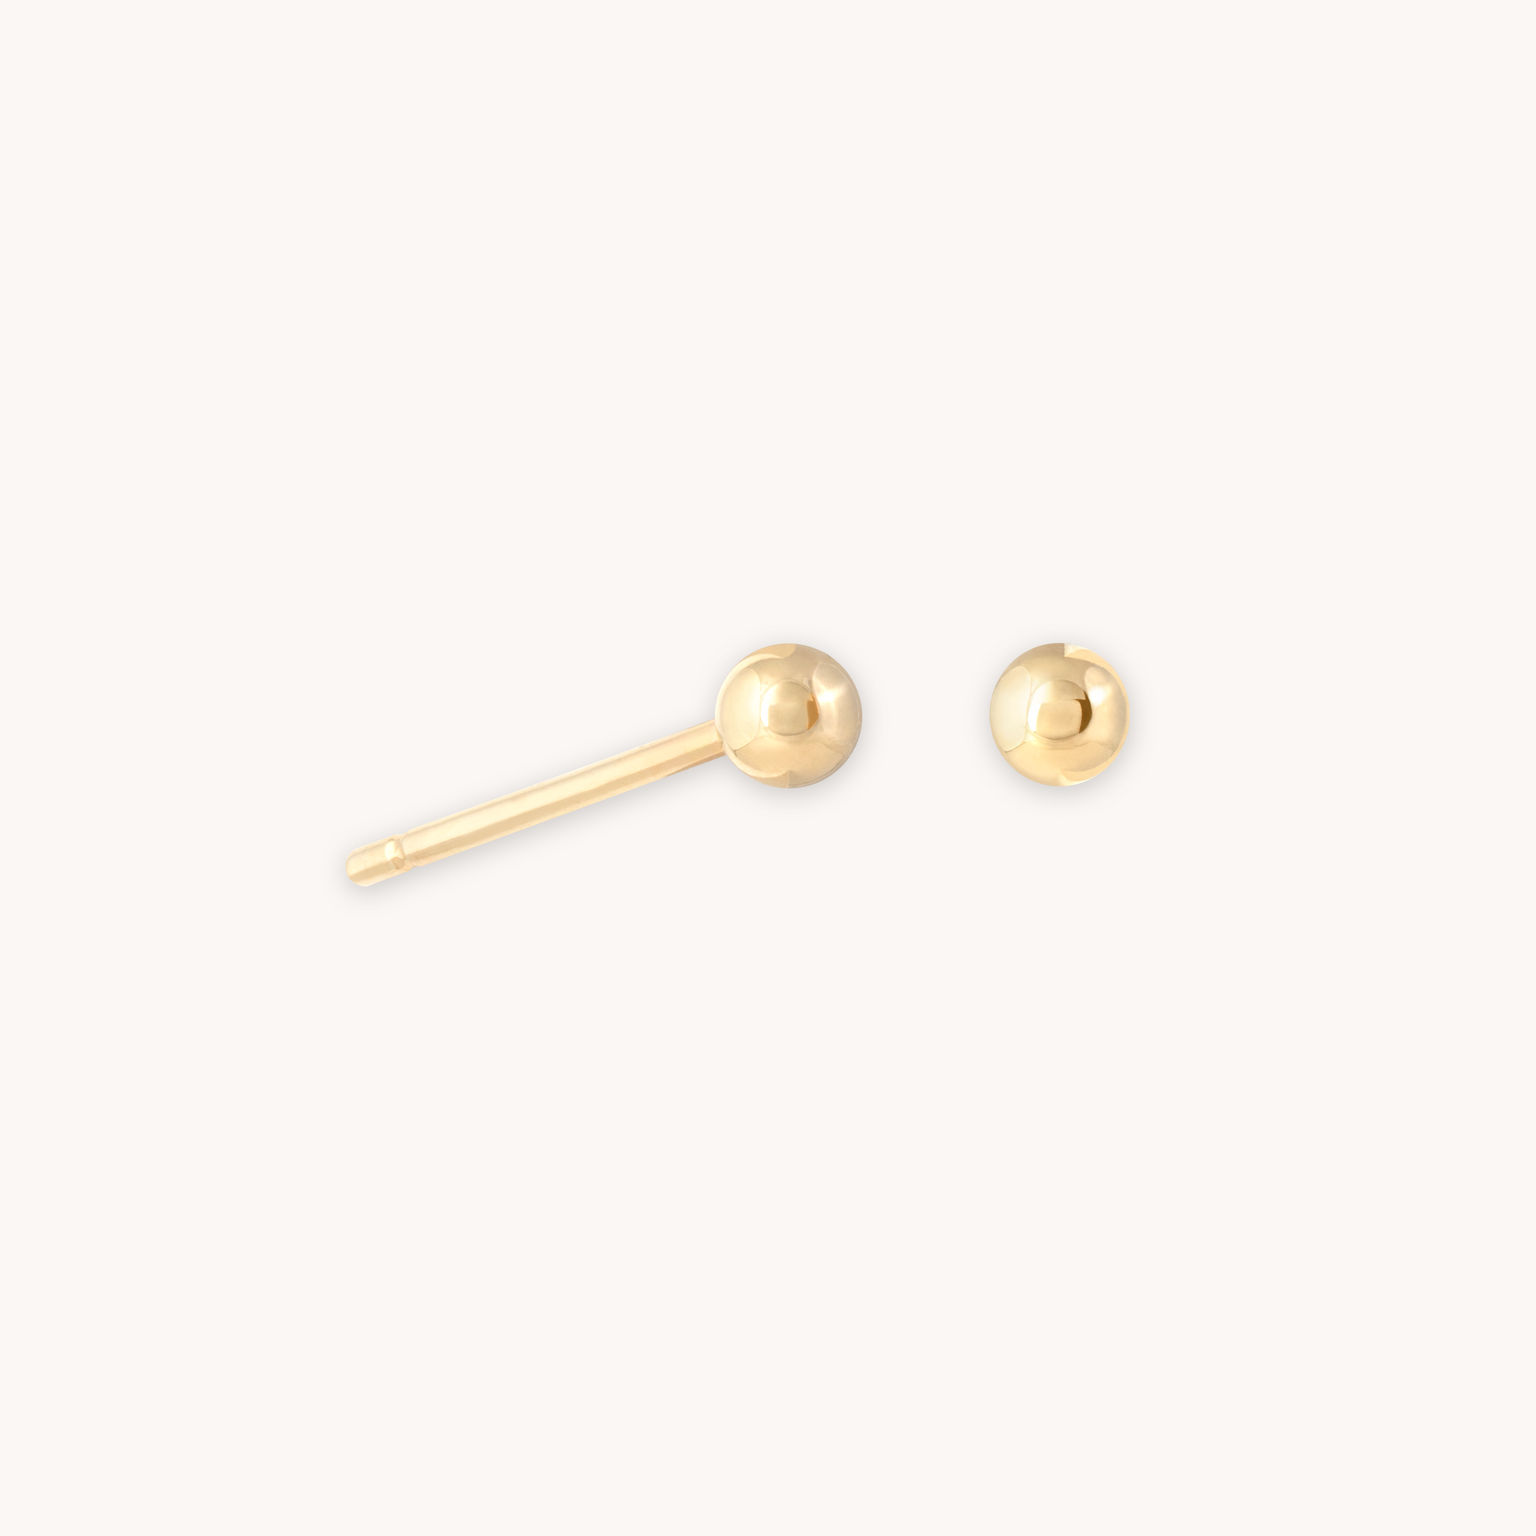 Large Ball Stud Earrings in Solid Gold CUT OUT